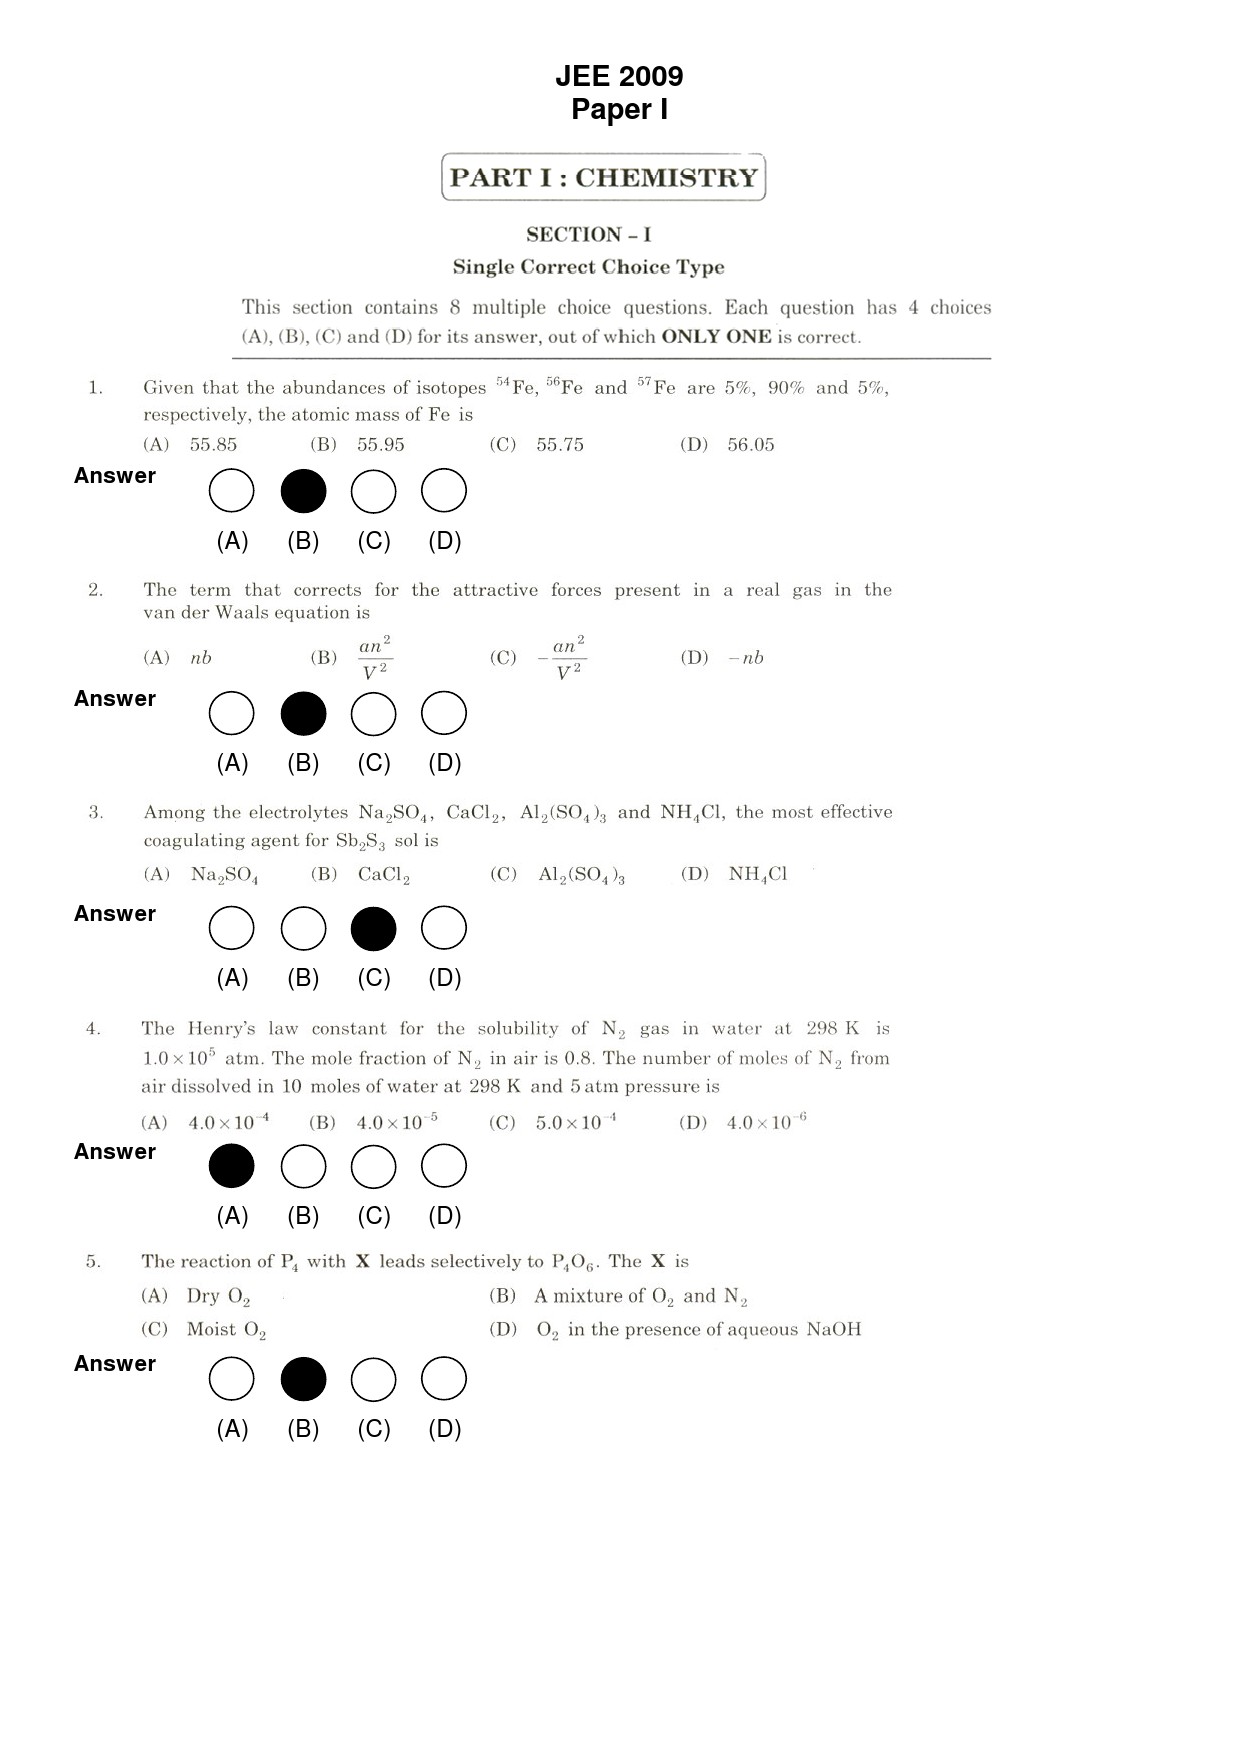 JEE Exam Question Paper 2009 Paper 1 1